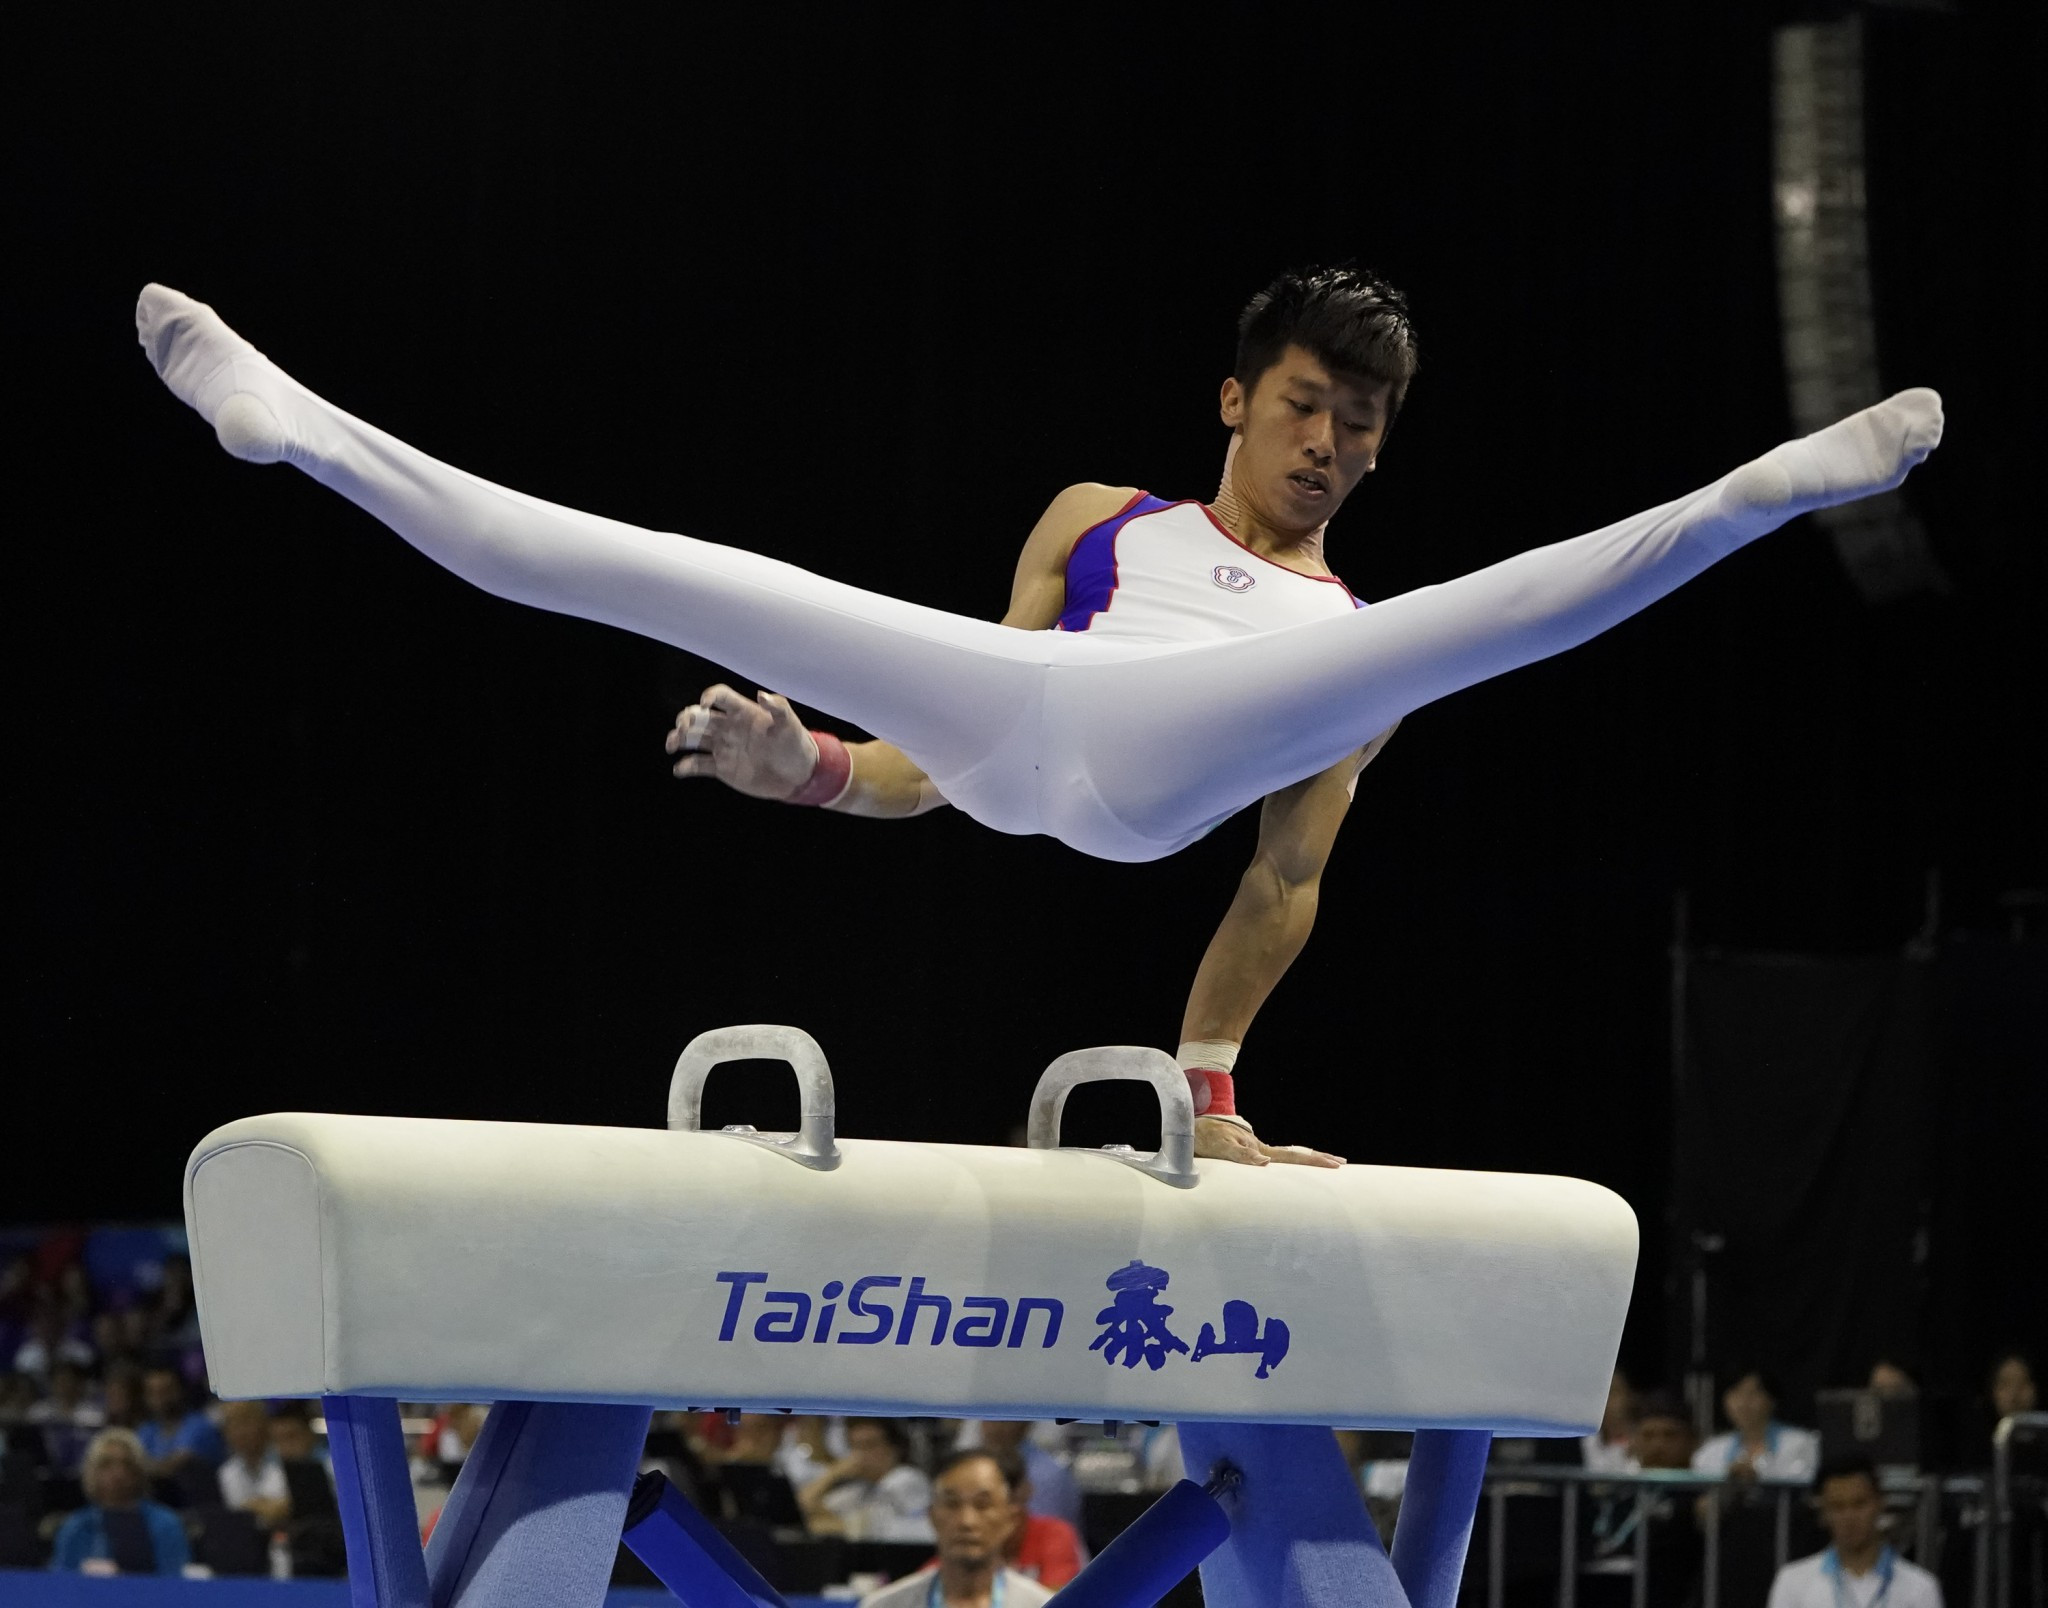 Ten gymnasts claim gold medals as artistic competition concludes at Taipei 2017